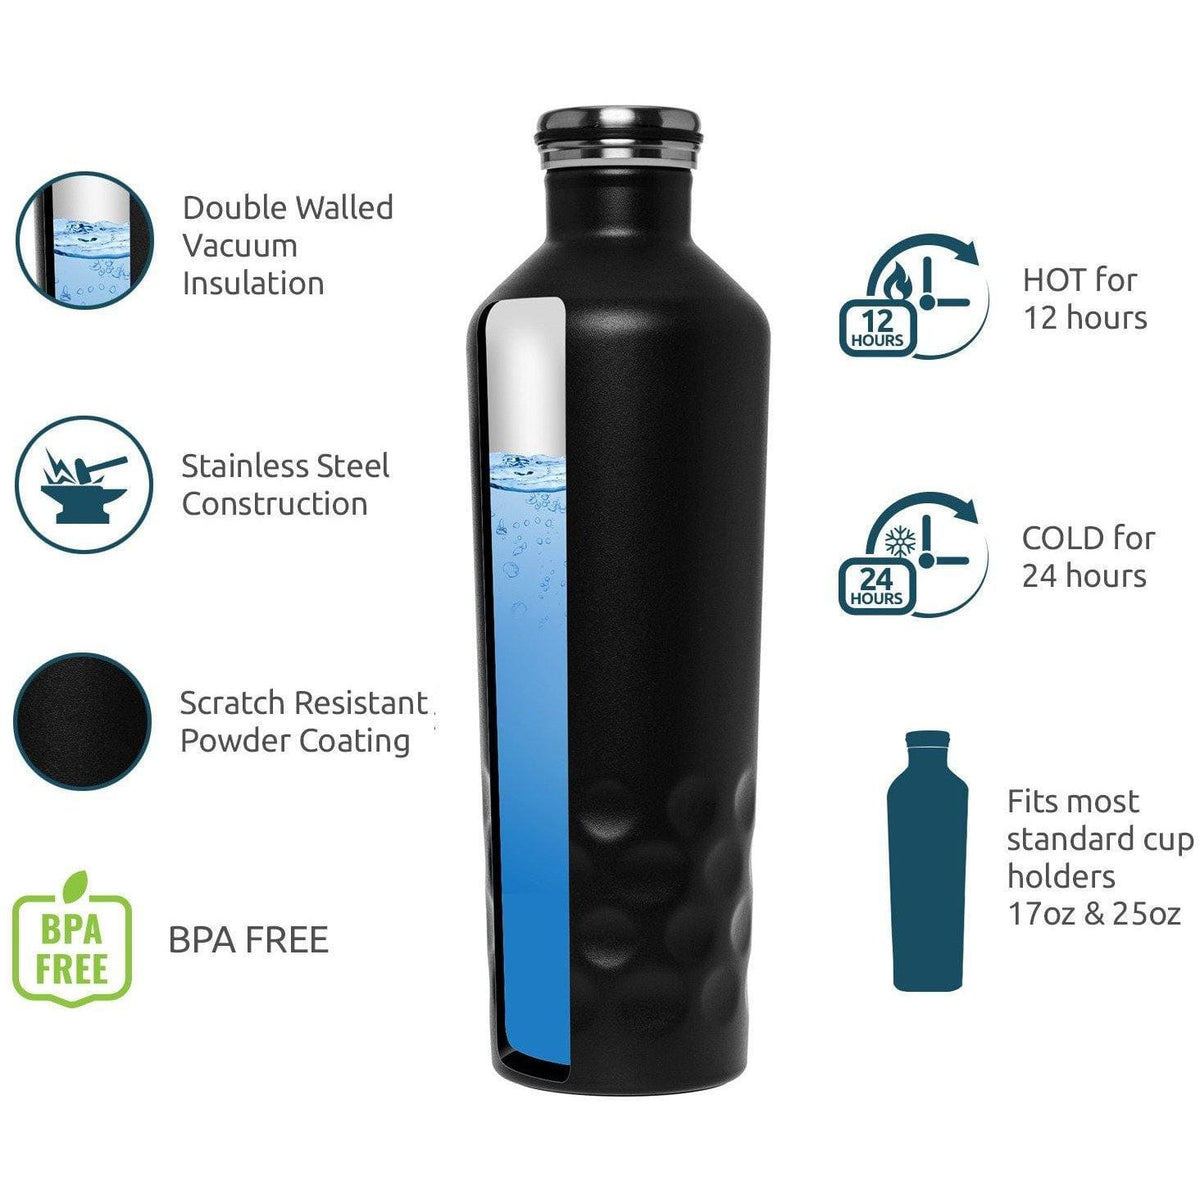 BeSpartanFit Accessories Mindful Design Water Bottle for movement muscle mood and motivation